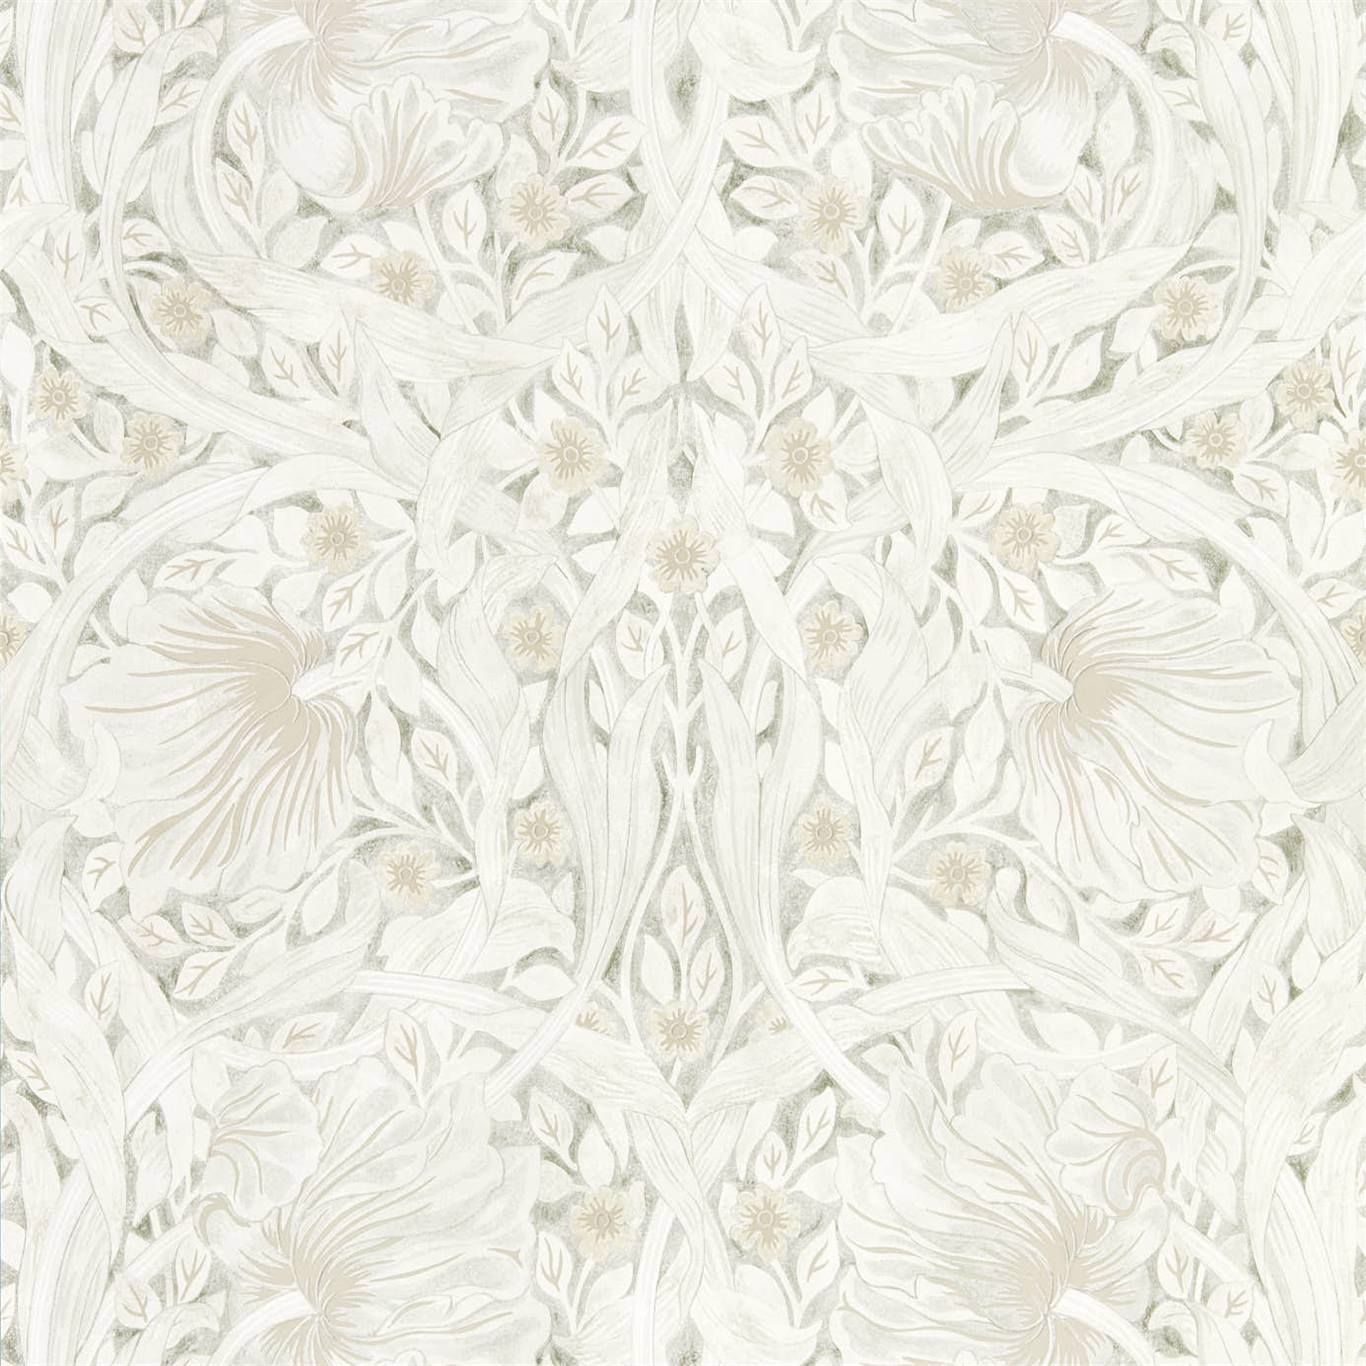 Pure Pimpernel Wallpaper by Morris & Co